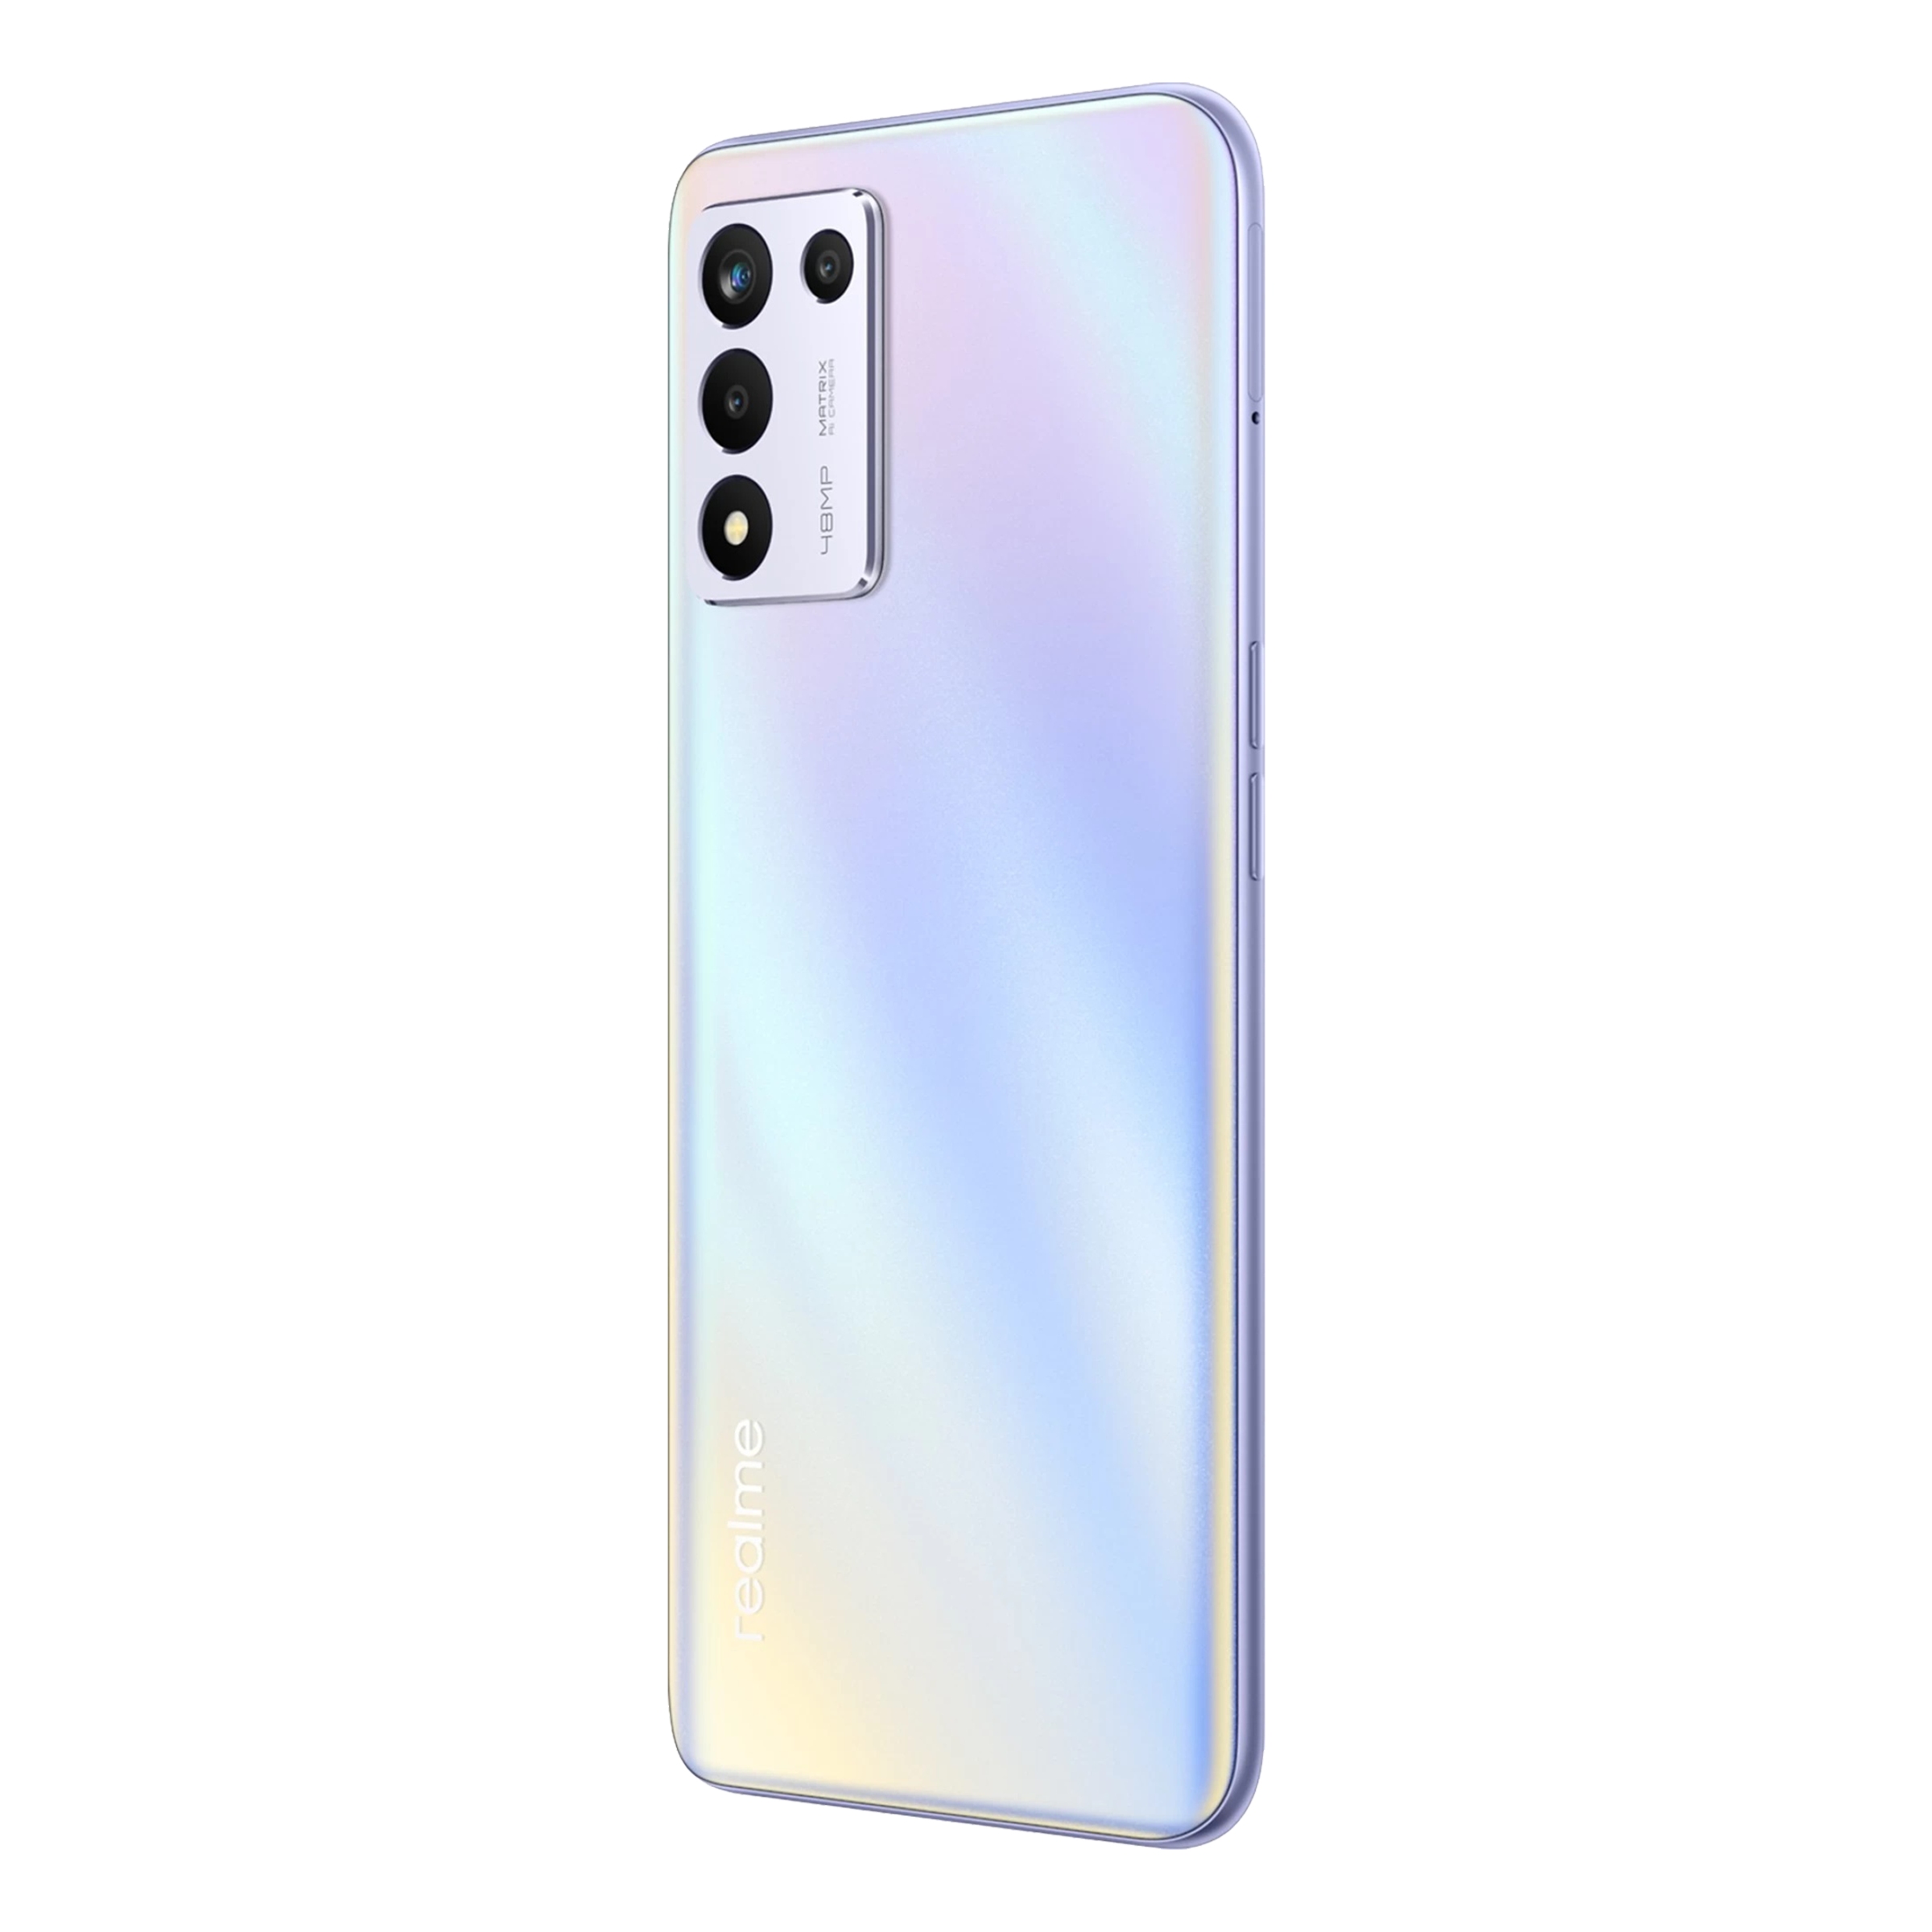 Realme 9 5G Speed Edition RMX3461 Starry Glow 128GB 6GB RAM Gsm Unlocked  Phone Qualcomm SM7325 Snapdragon 778G 5G 48MP The phone comes with a 144 Hz  refresh rate 6.60-inch touchscreen display